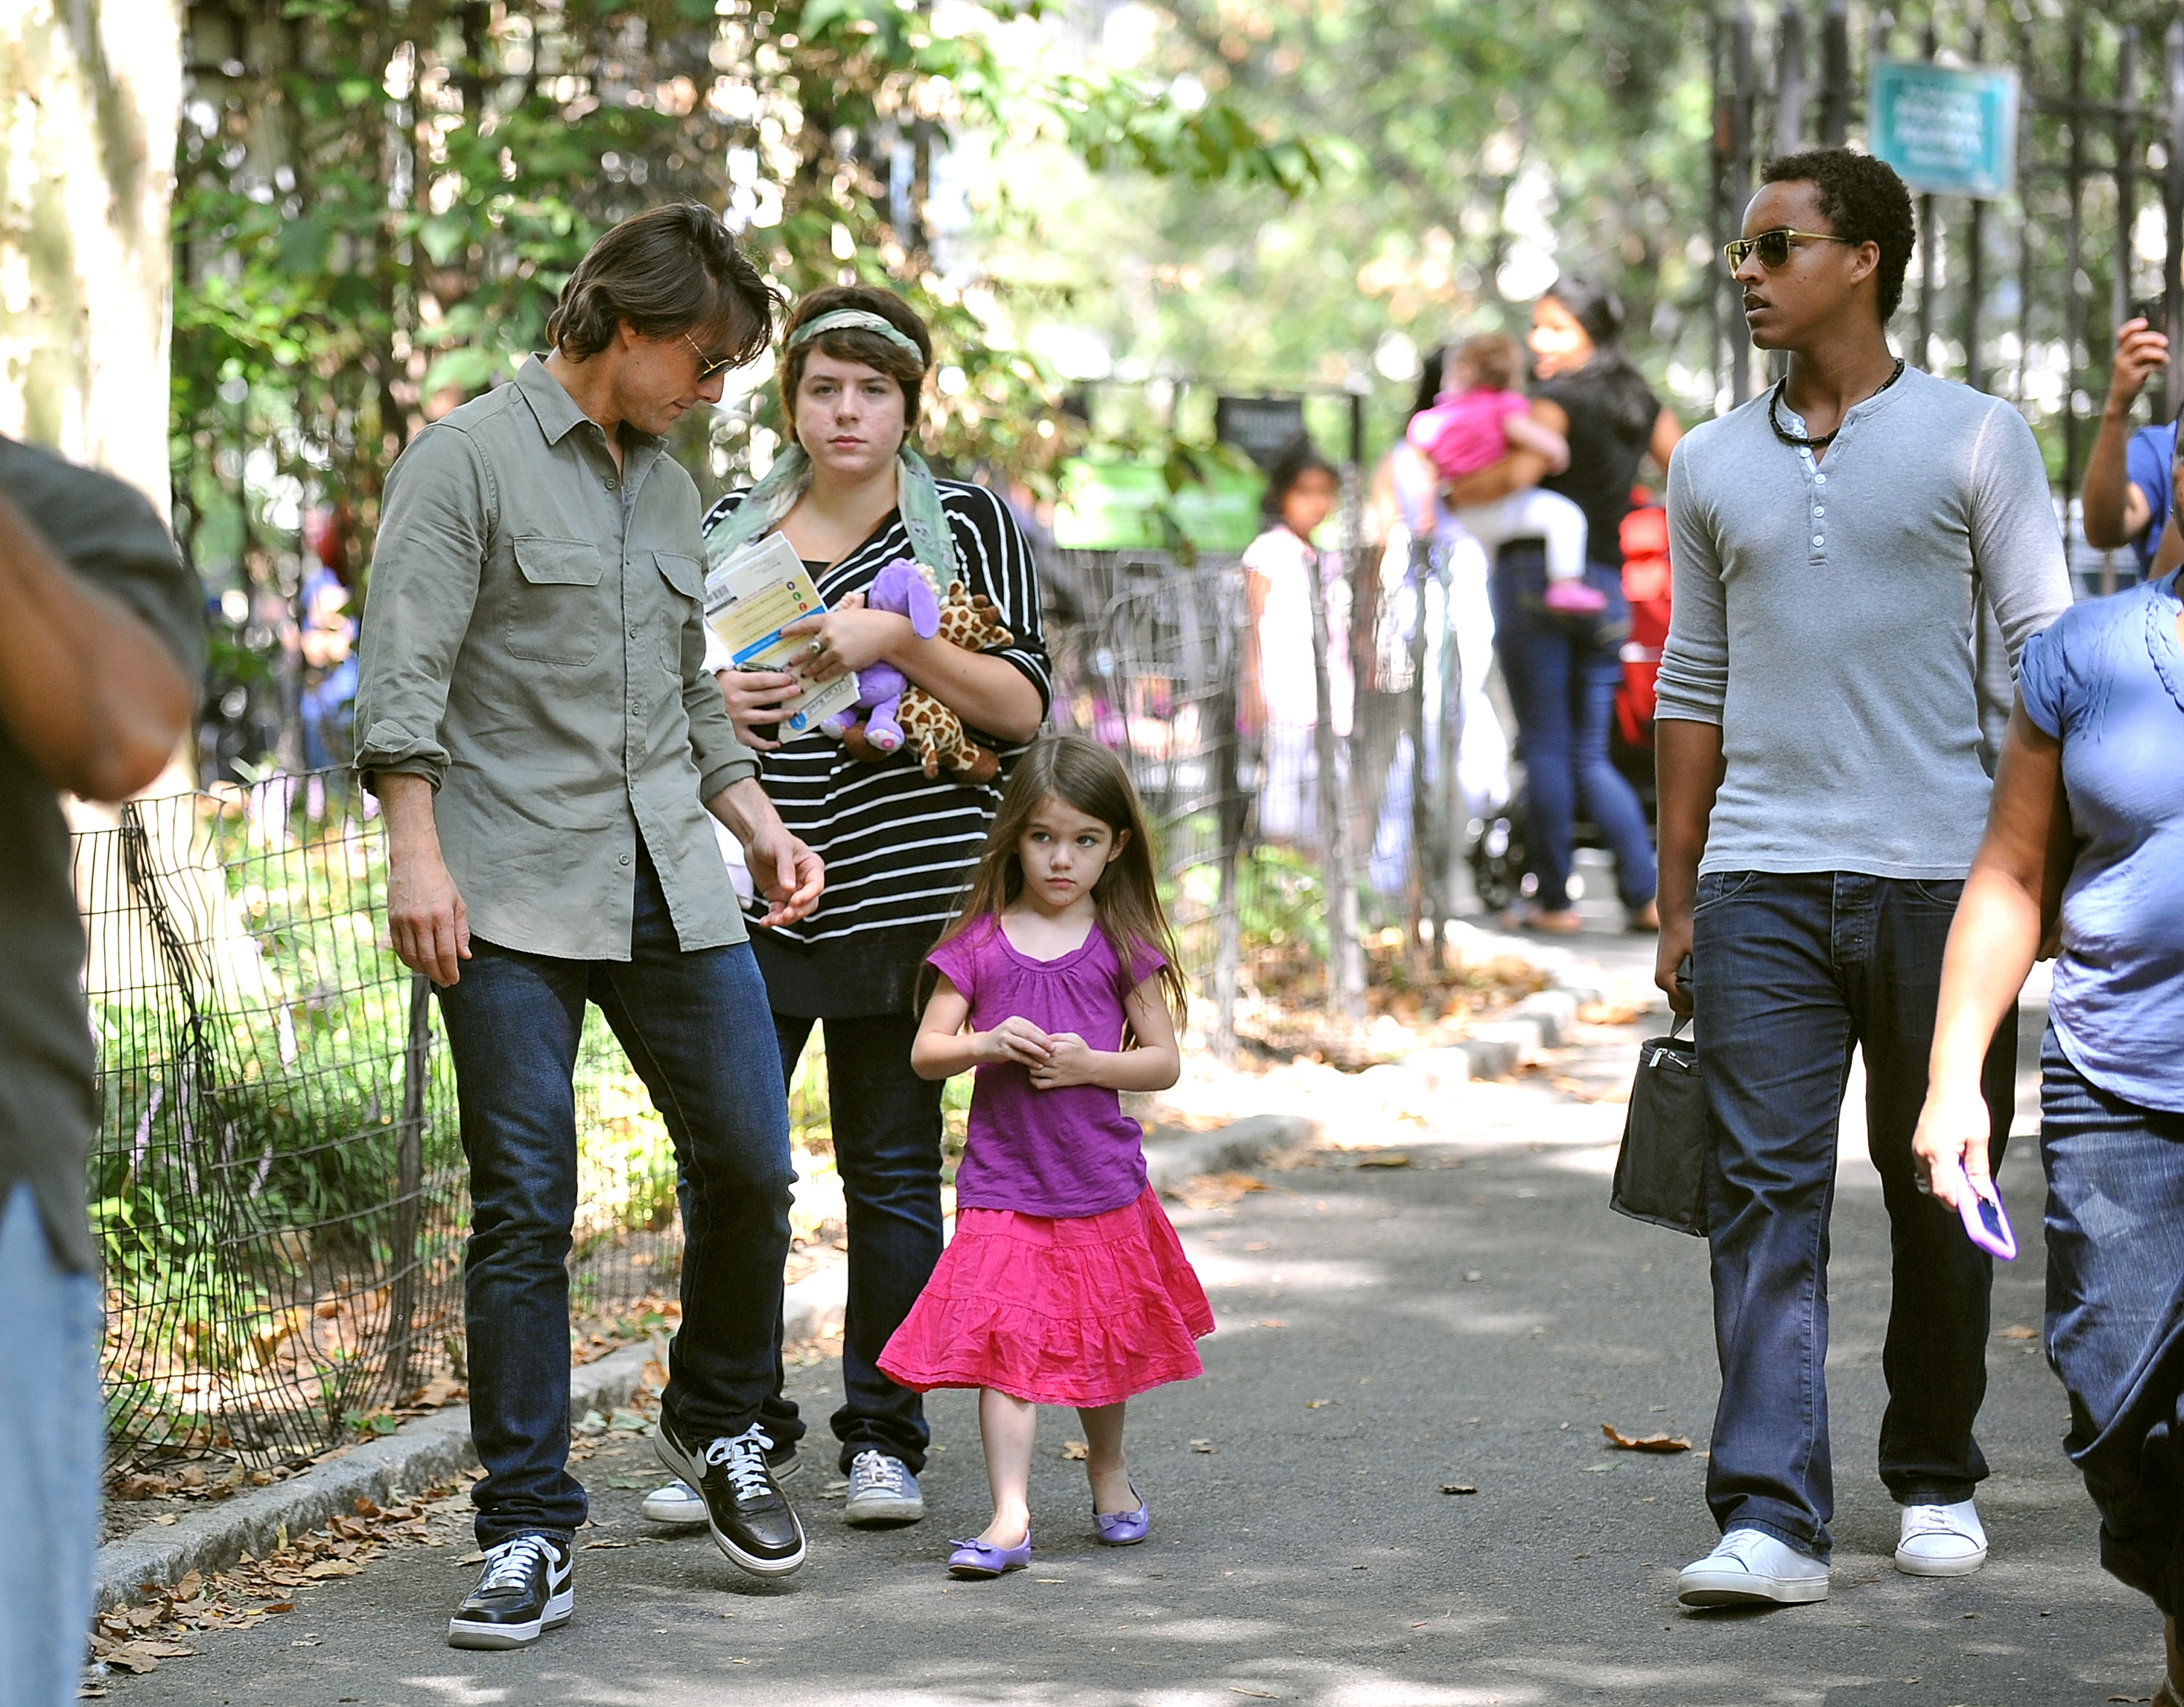 Connor Kidman Cruise, Isabella Kidman Cruise, Tom Cruise, and Suri Cruise visit a Central Park West playground on September 7, 2010, in New York City | Source: Getty Images